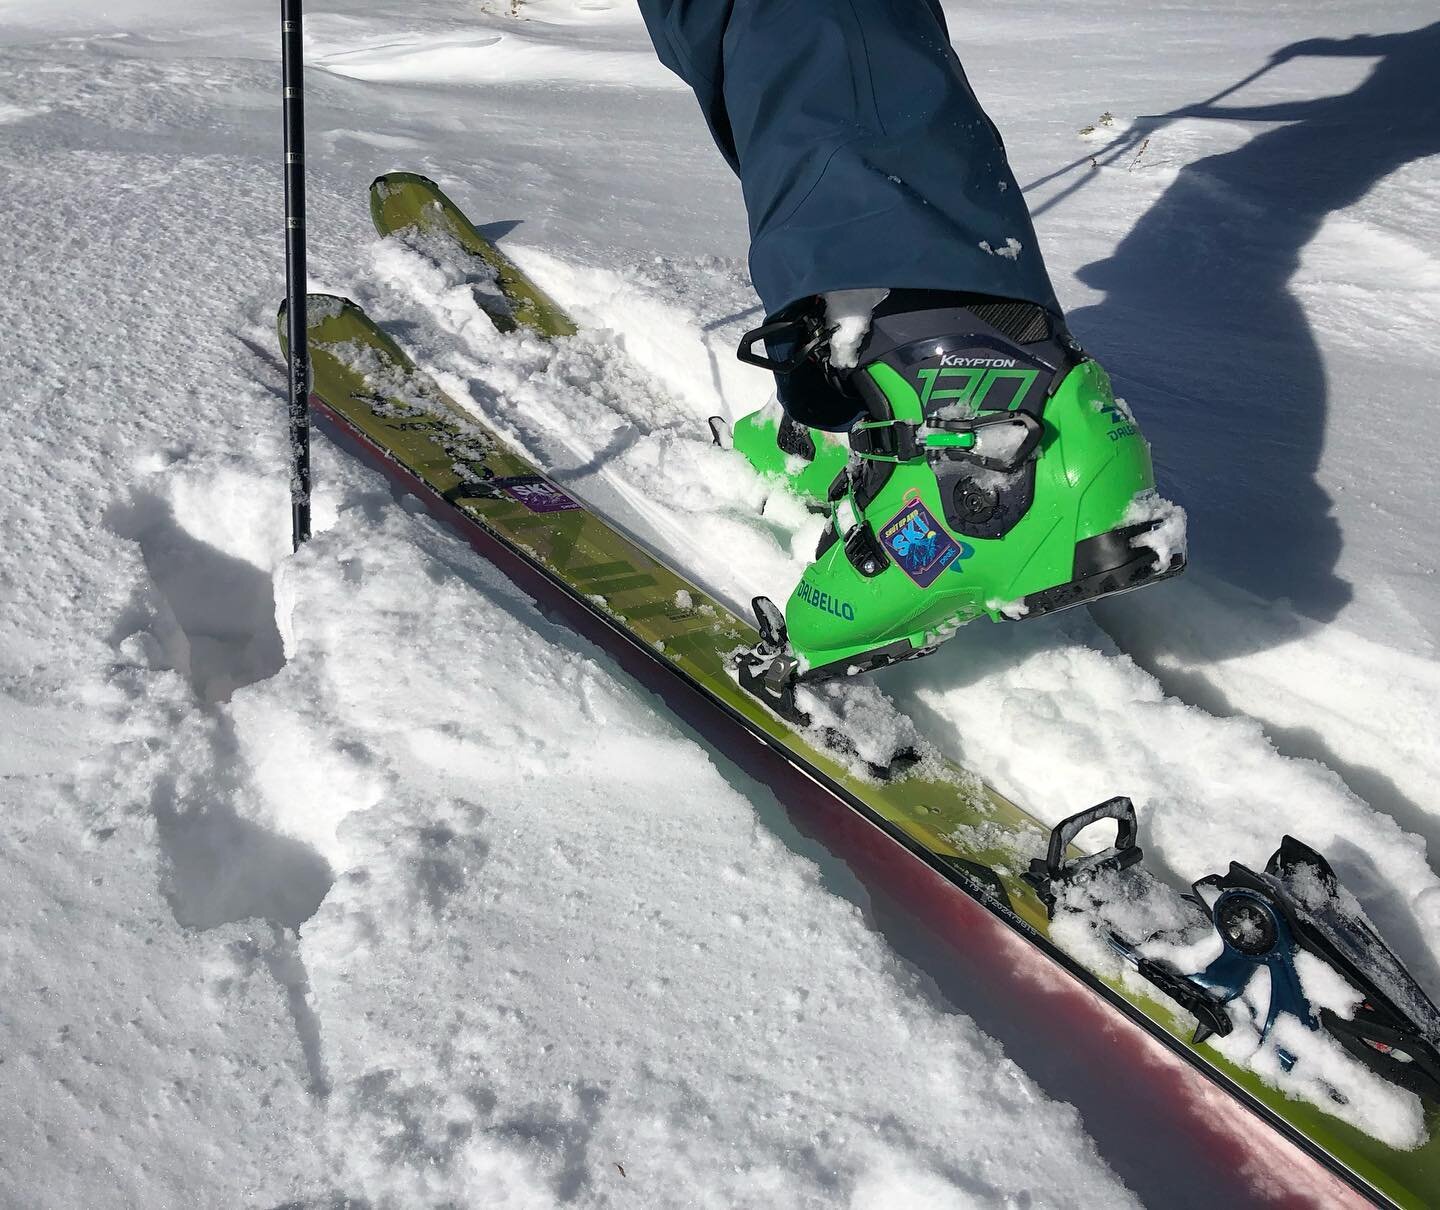 Looking for a quiver killer that can do anything? The @voelklskis Blaze paired up with a set of @markerproducts Duke PT&rsquo;s is a take it anywhere and do it all set up, from hot laps in resort to the backcountry.